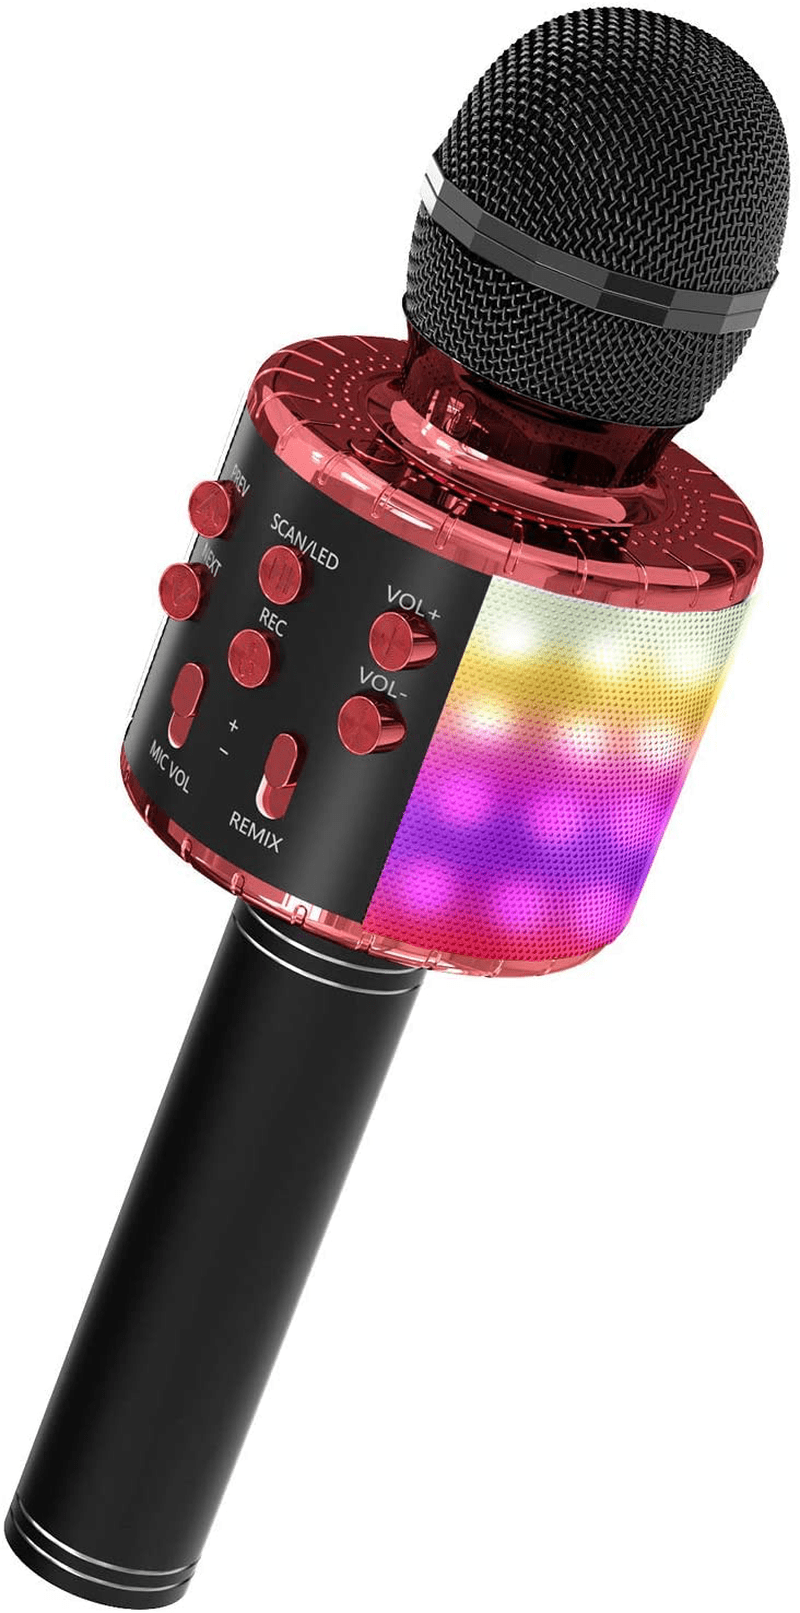 OVELLIC Karaoke Microphone for Kids, Wireless Bluetooth Karaoke Microphone with LED Lights, Portable Handheld Mic Speaker Machine, Great Gifts Toys for Girls Boys Adults All Age (Rose Gold) Electronics > Audio > Audio Components > Microphones OVELLIC Black Red  